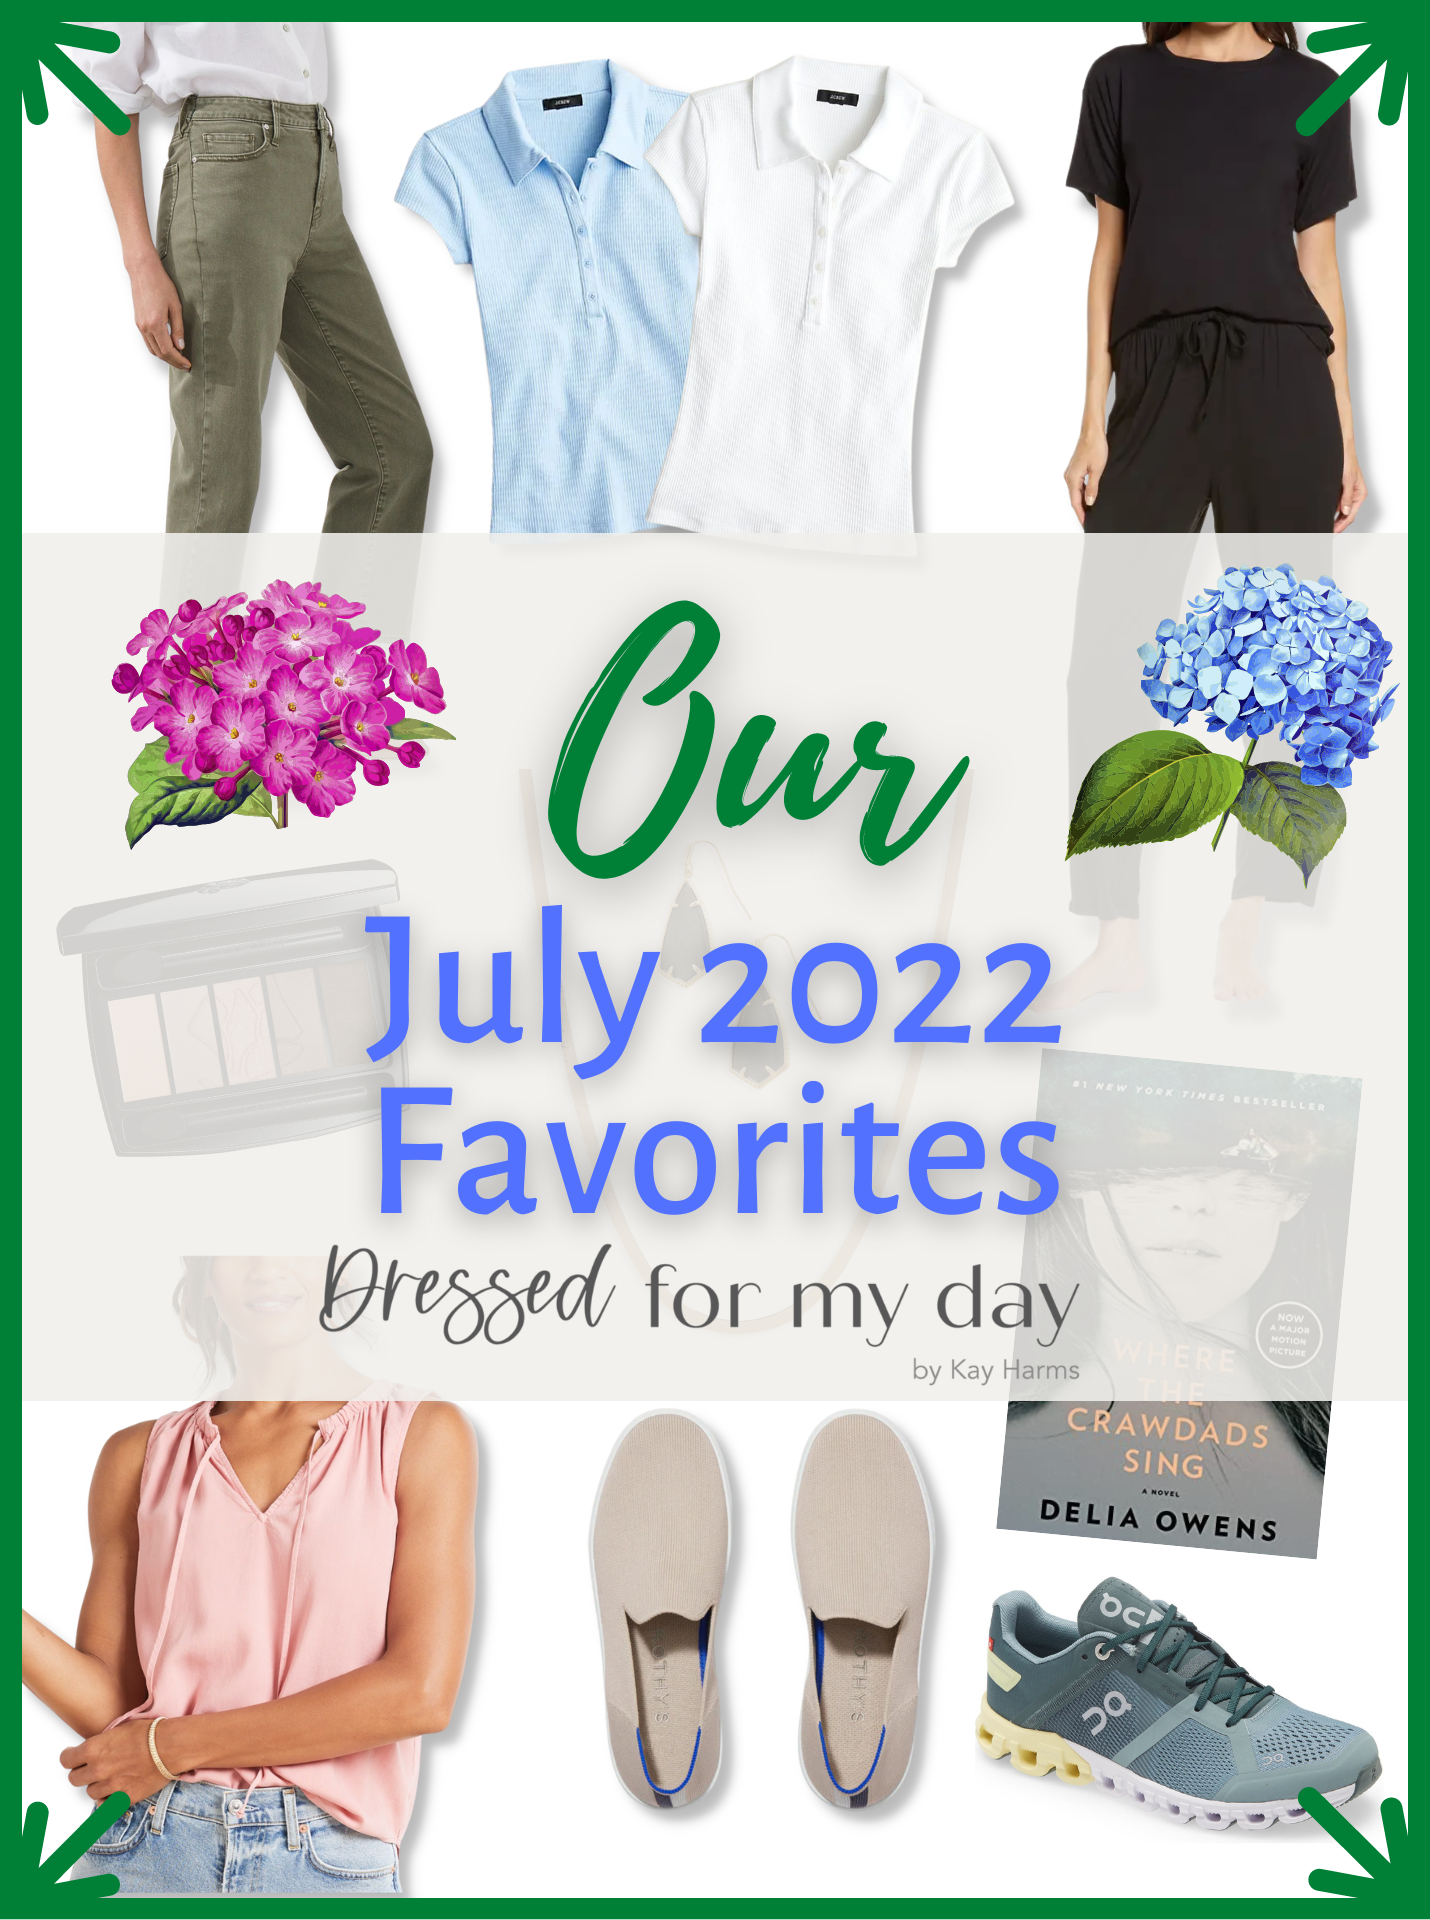 Our July Favorites